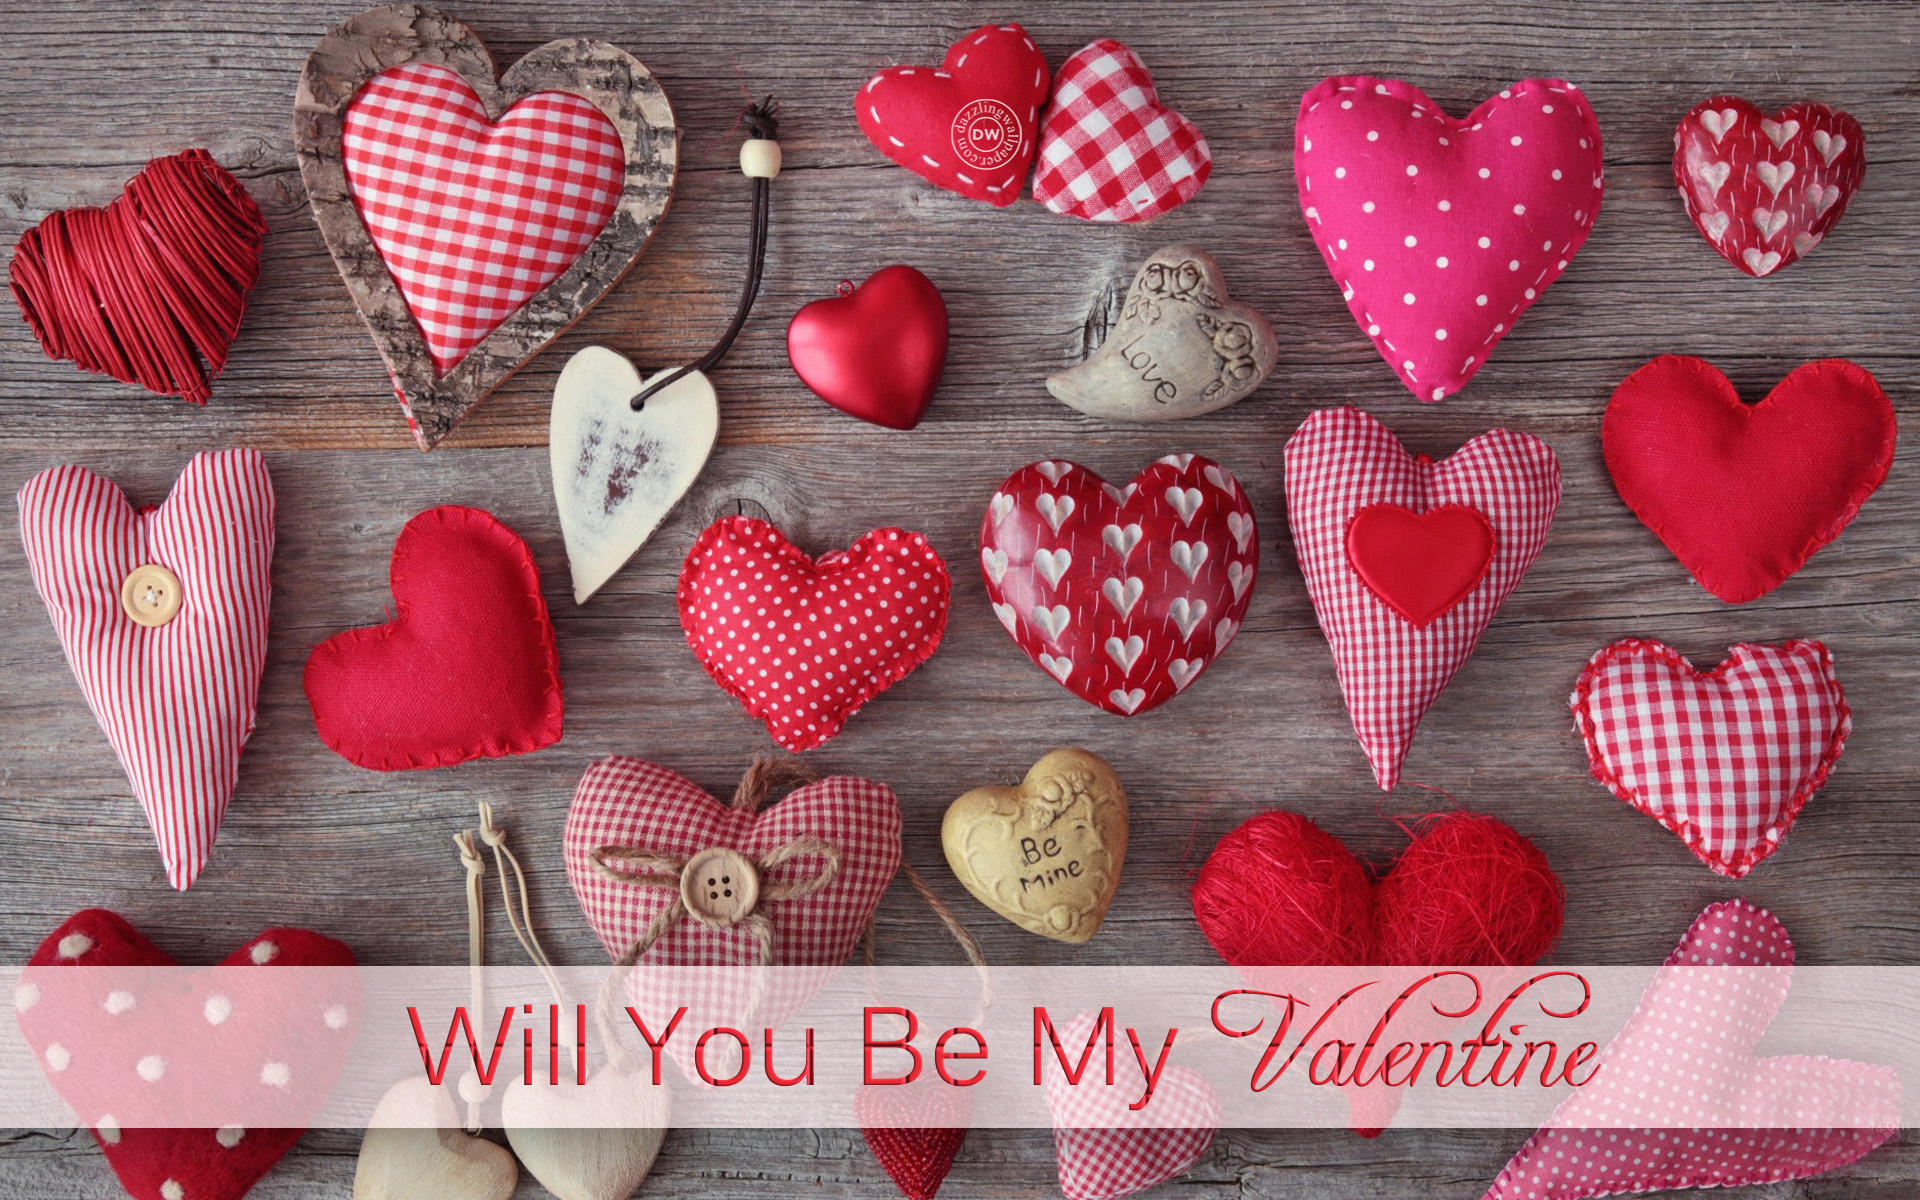 Cute Love Valentine Day Wallpaper Background With